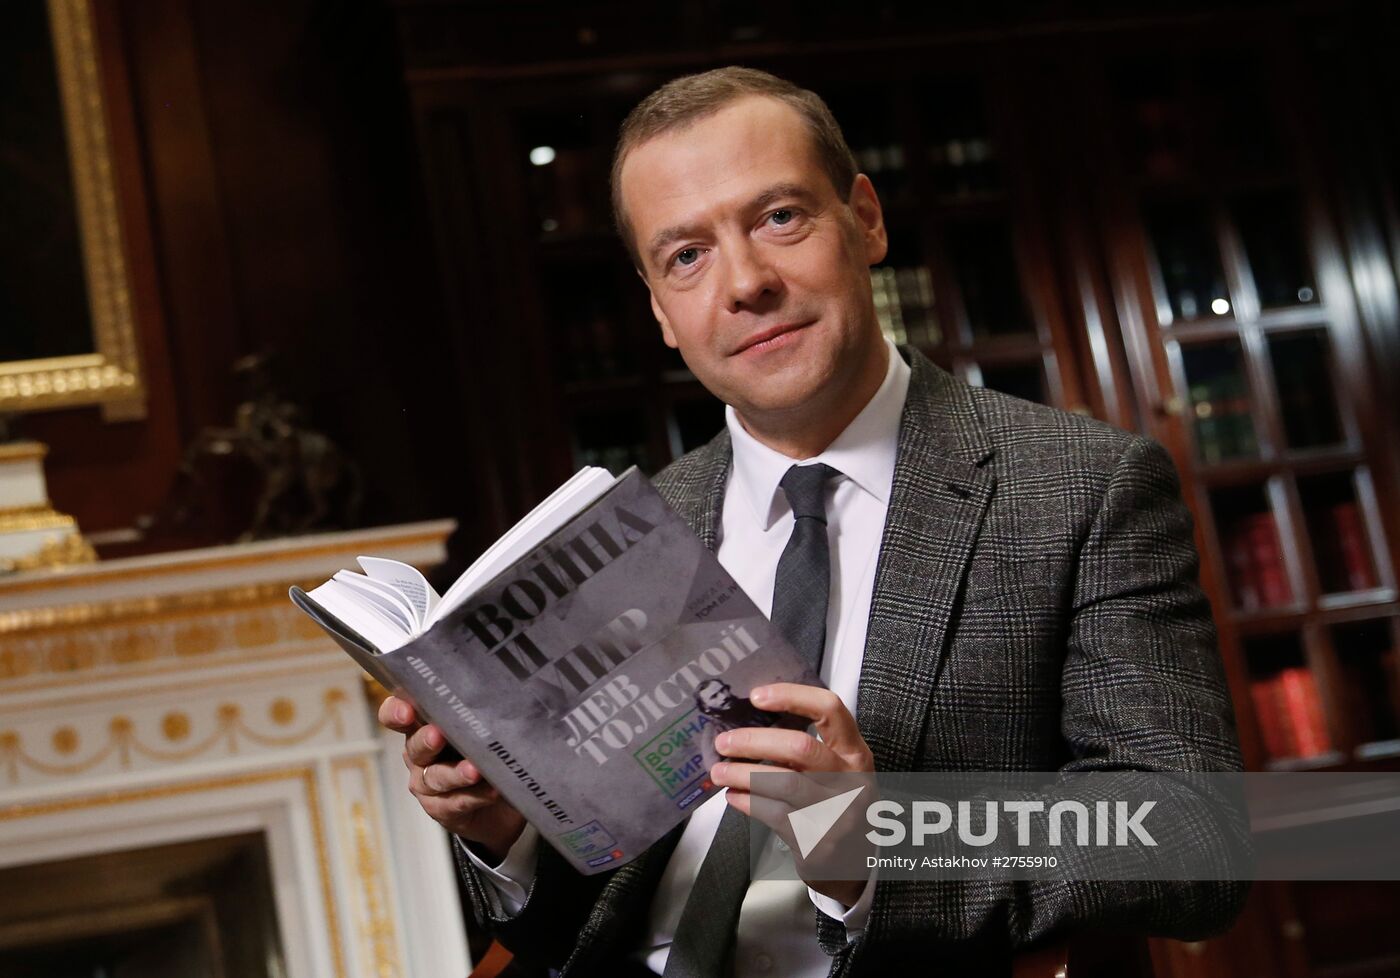 Prime Minister Dmitry Medvedev takes part in War and Peace Literary Marathon project